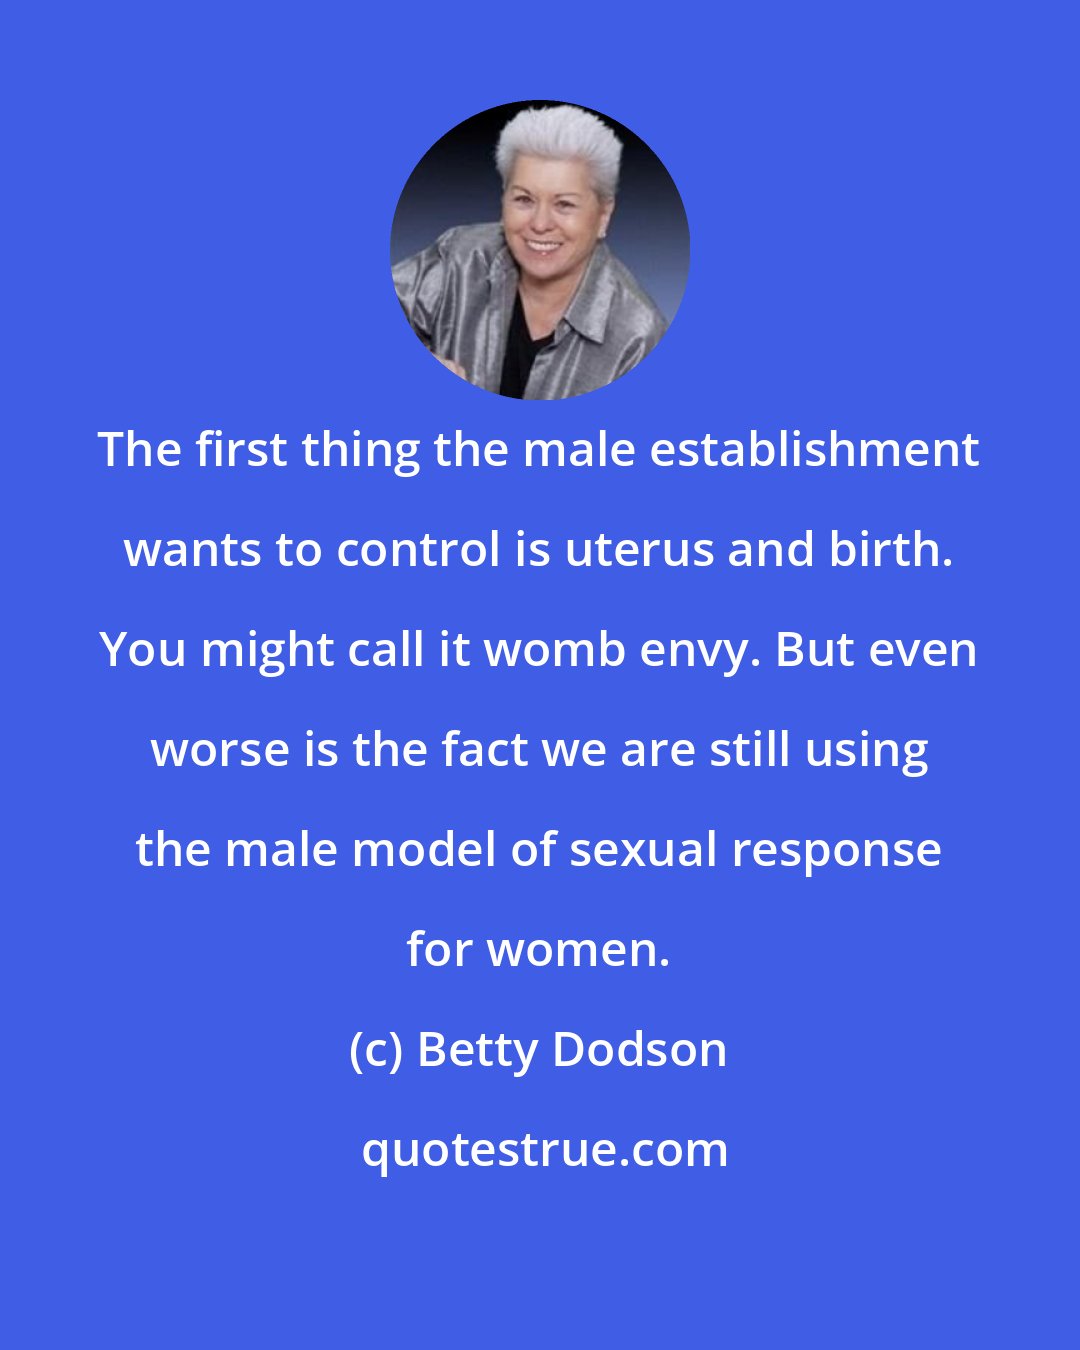 Betty Dodson: The first thing the male establishment wants to control is uterus and birth. You might call it womb envy. But even worse is the fact we are still using the male model of sexual response for women.